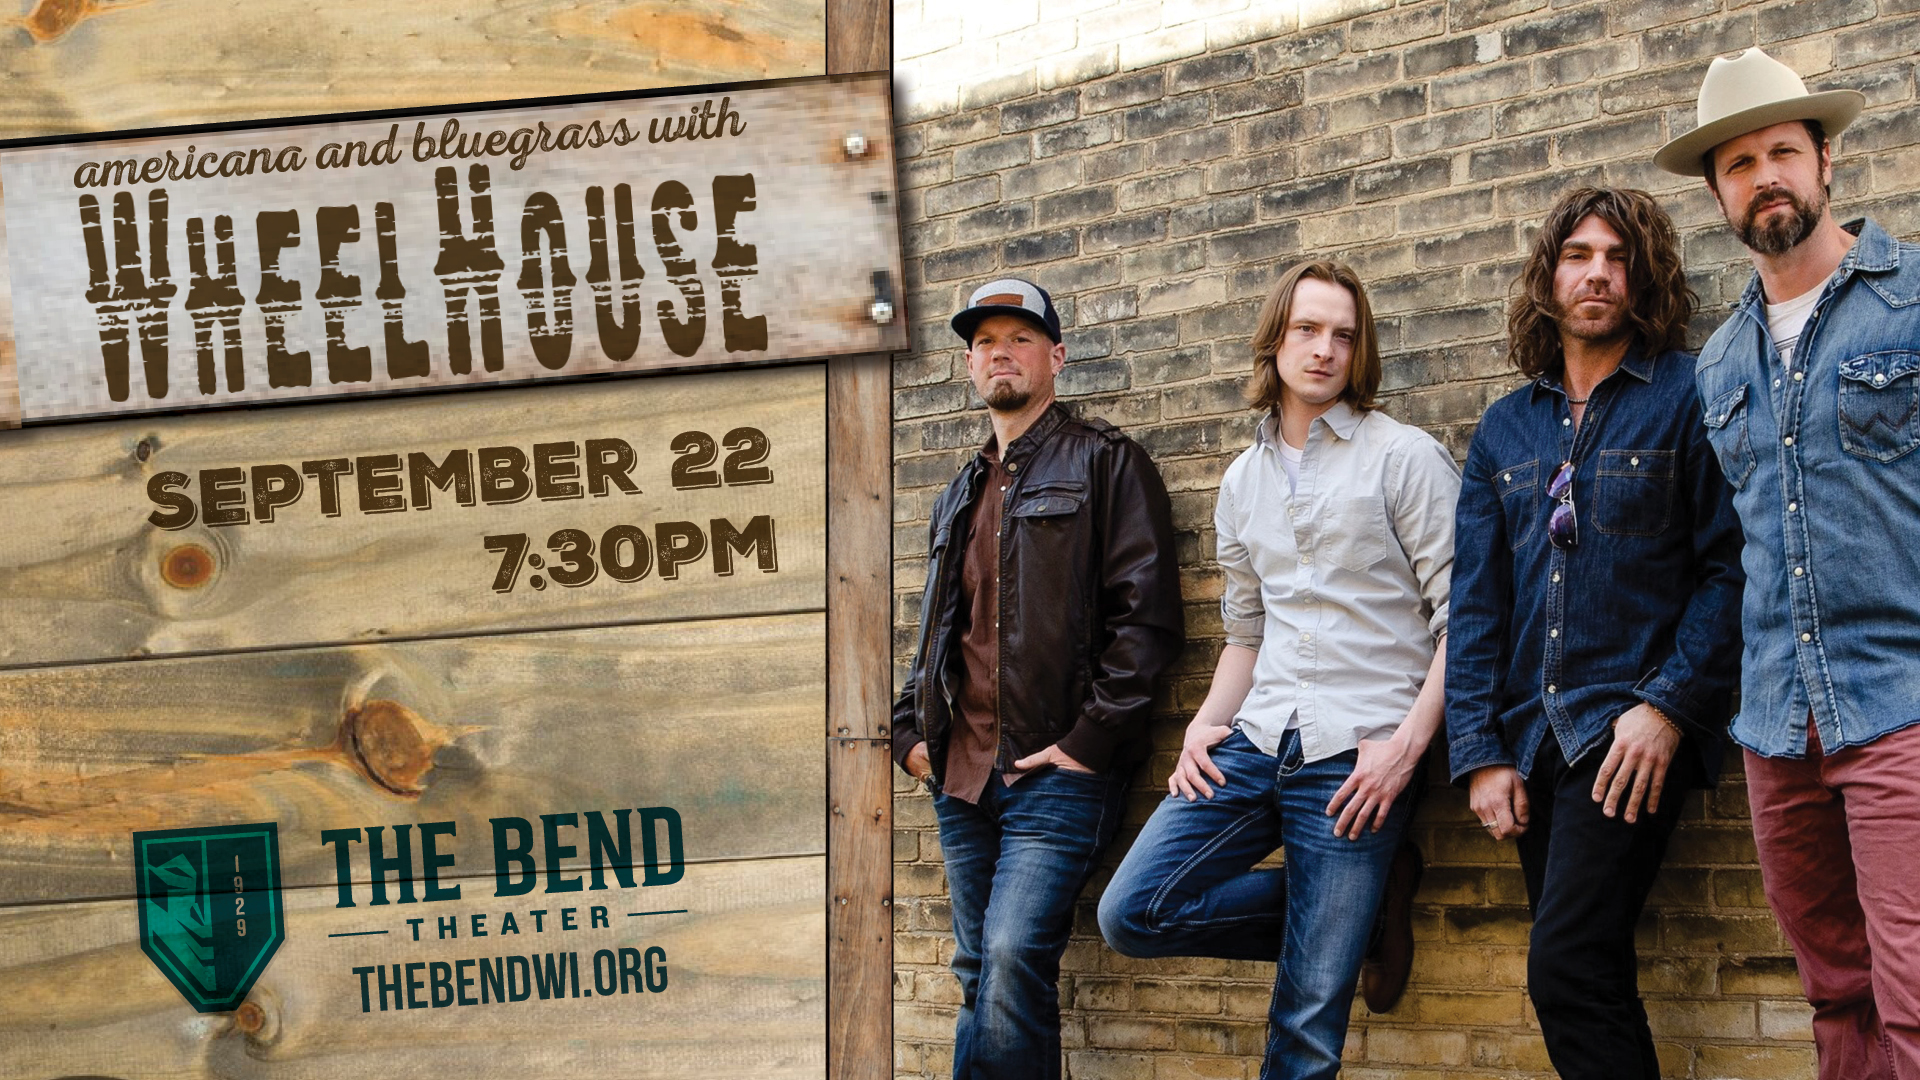 Live Music with Wheelhouse at The Bend Theater